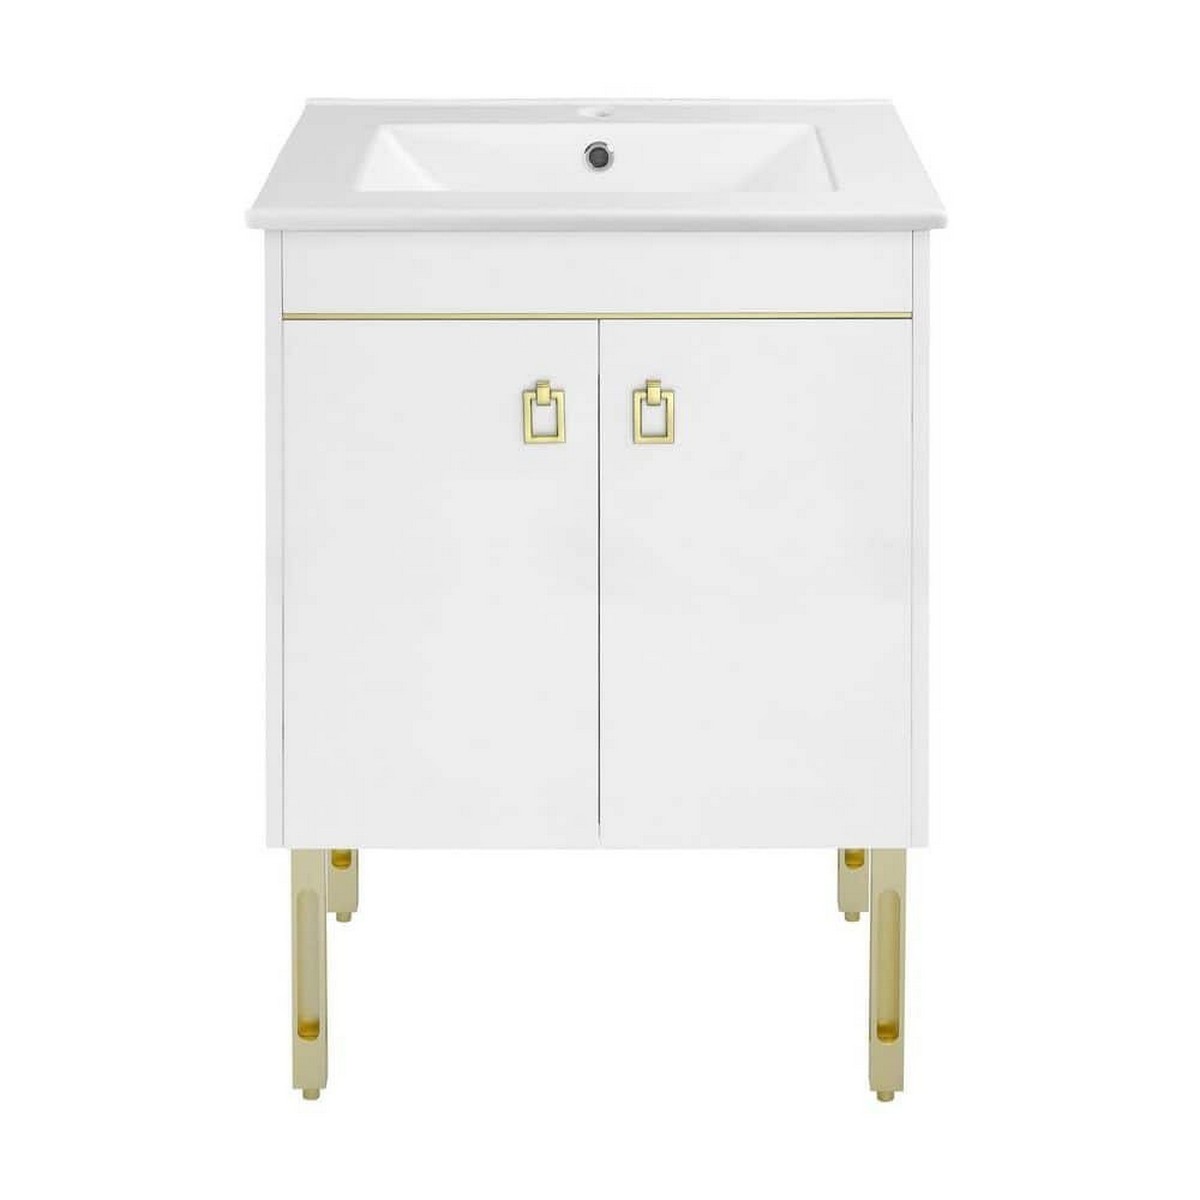 SWISS MADISON SM-BV710 LUMIERE 24 INCH FREESTANDING SINGLE SINK BATHROOM VANITY IN GLOSSY WHITE AND GOLD